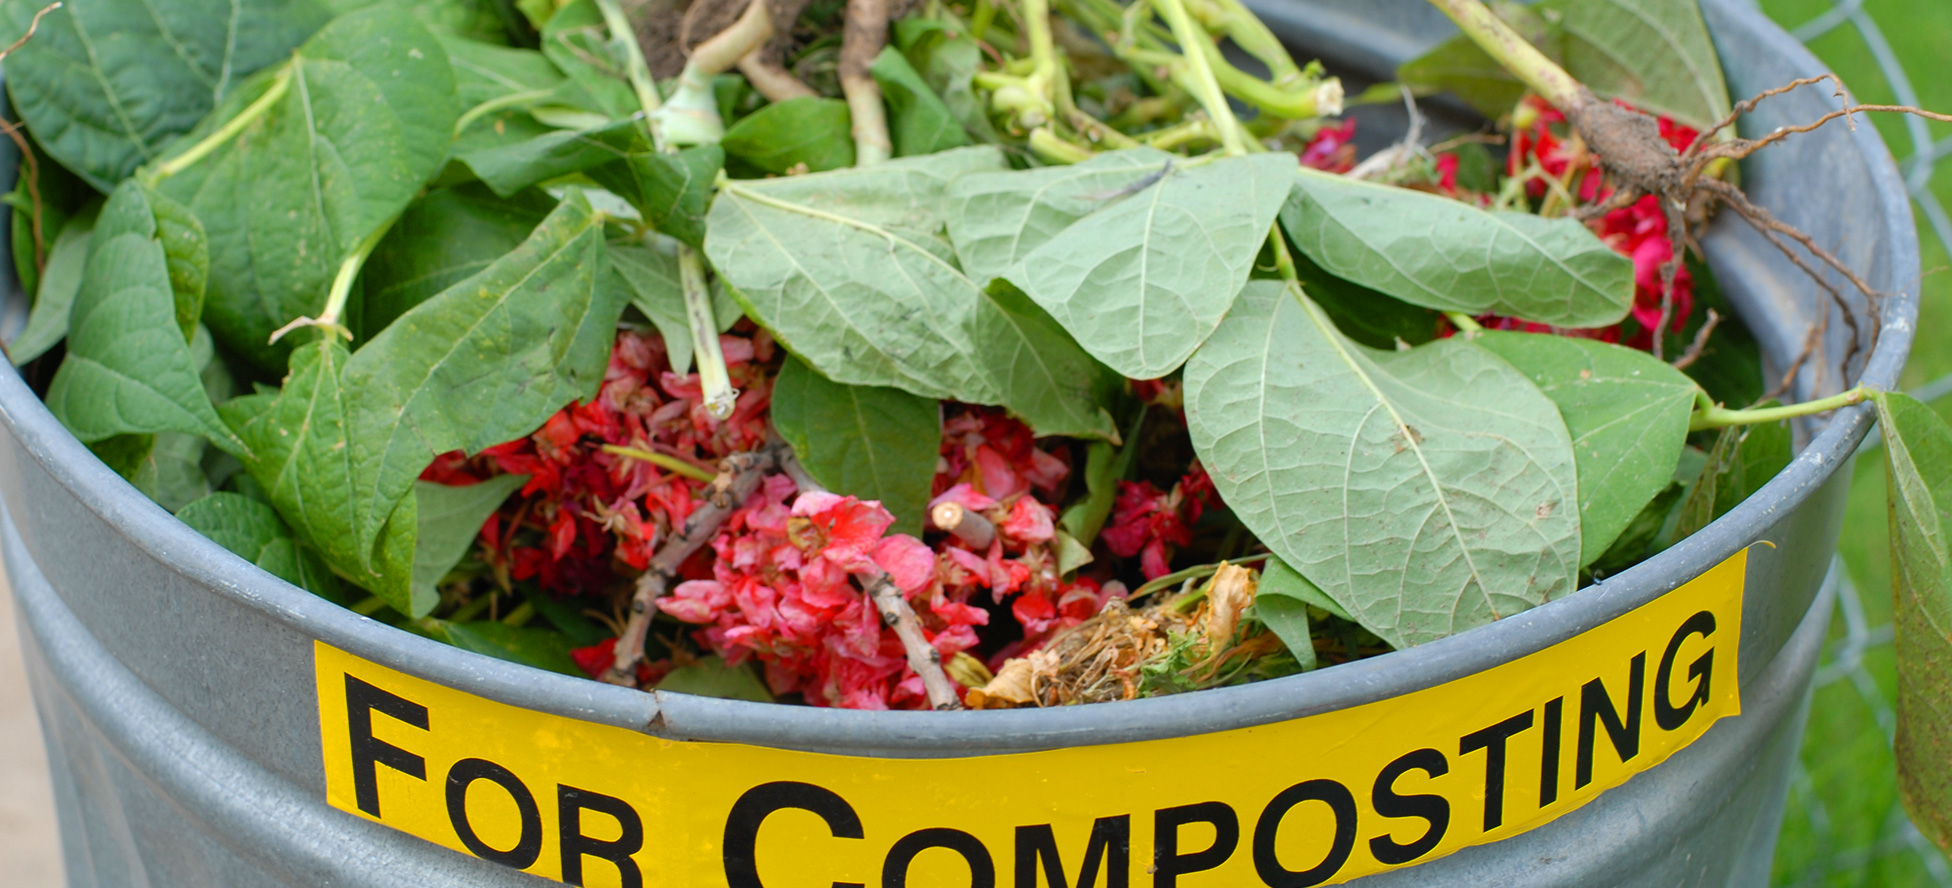 Metal container with plant clippings and food intended for compost pile